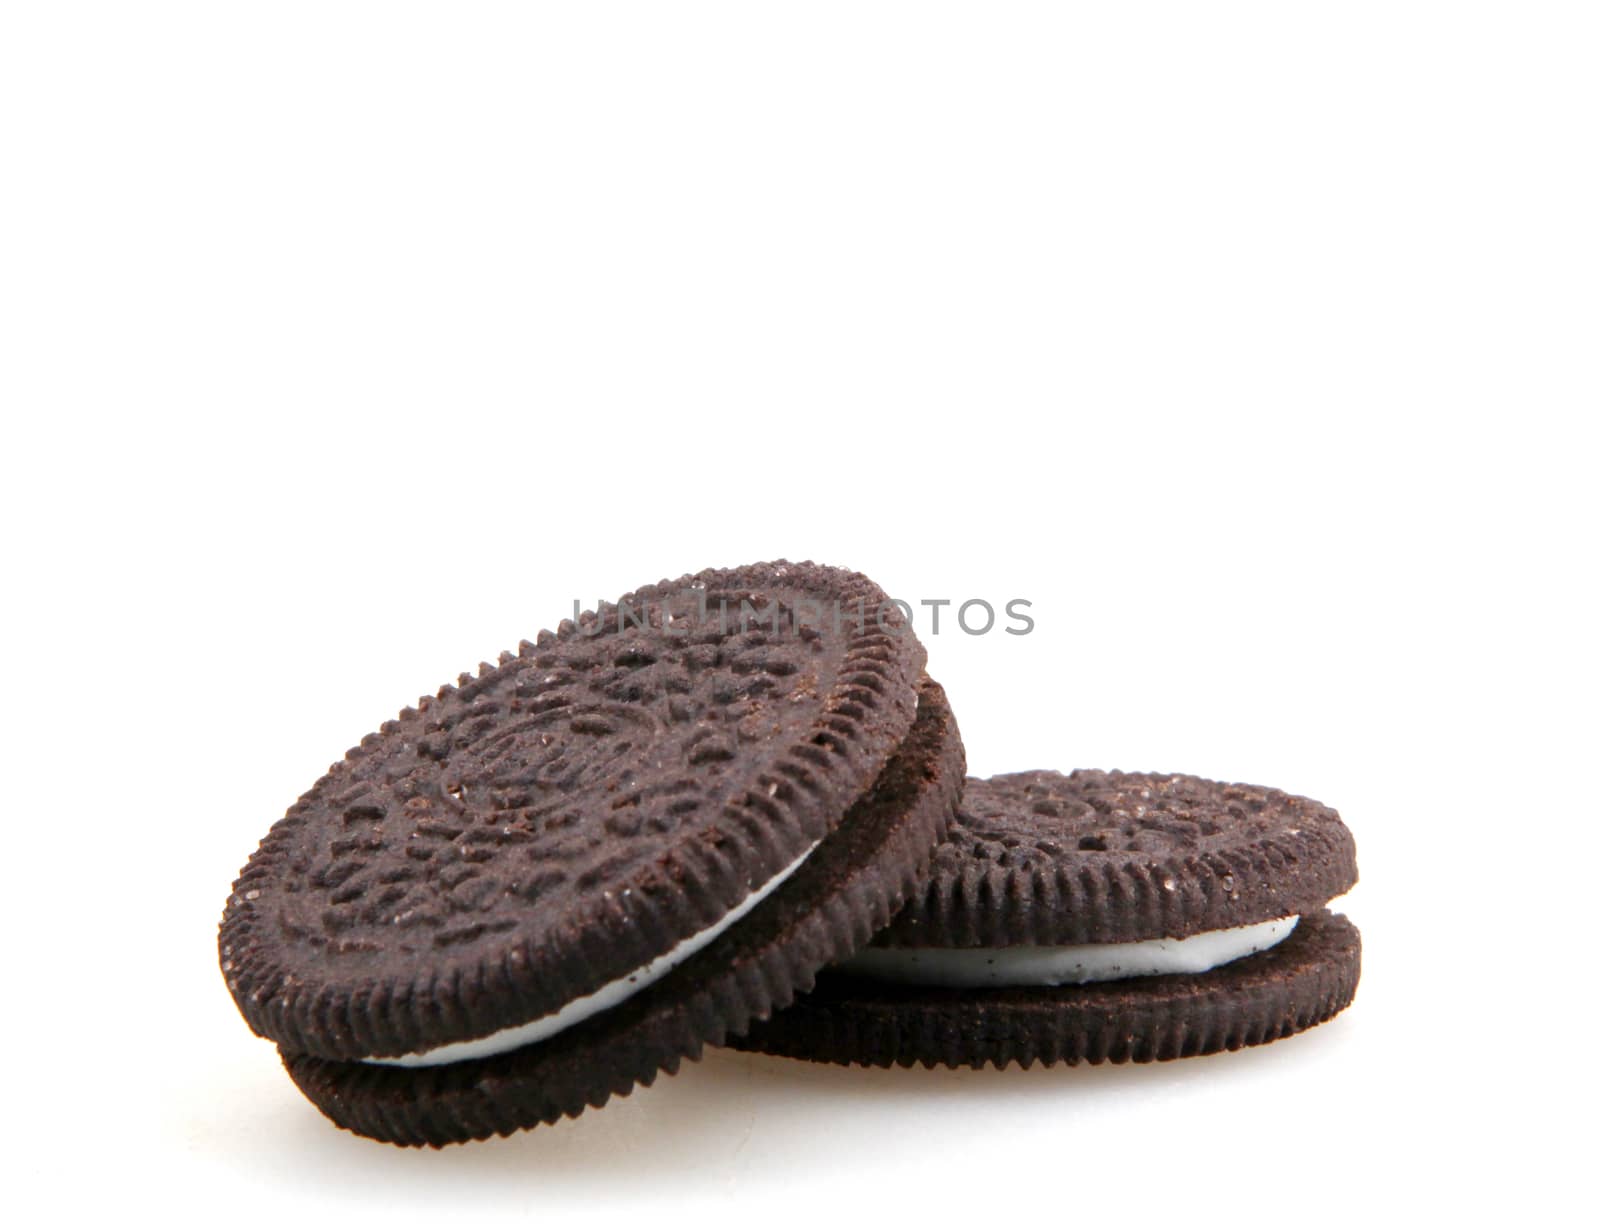 AYTOS, BULGARIA - OCTOBER 04, 2015: Oreo isolated on white background. Oreo is a sandwich cookie consisting of two chocolate disks with a sweet cream filling in between. by nenov